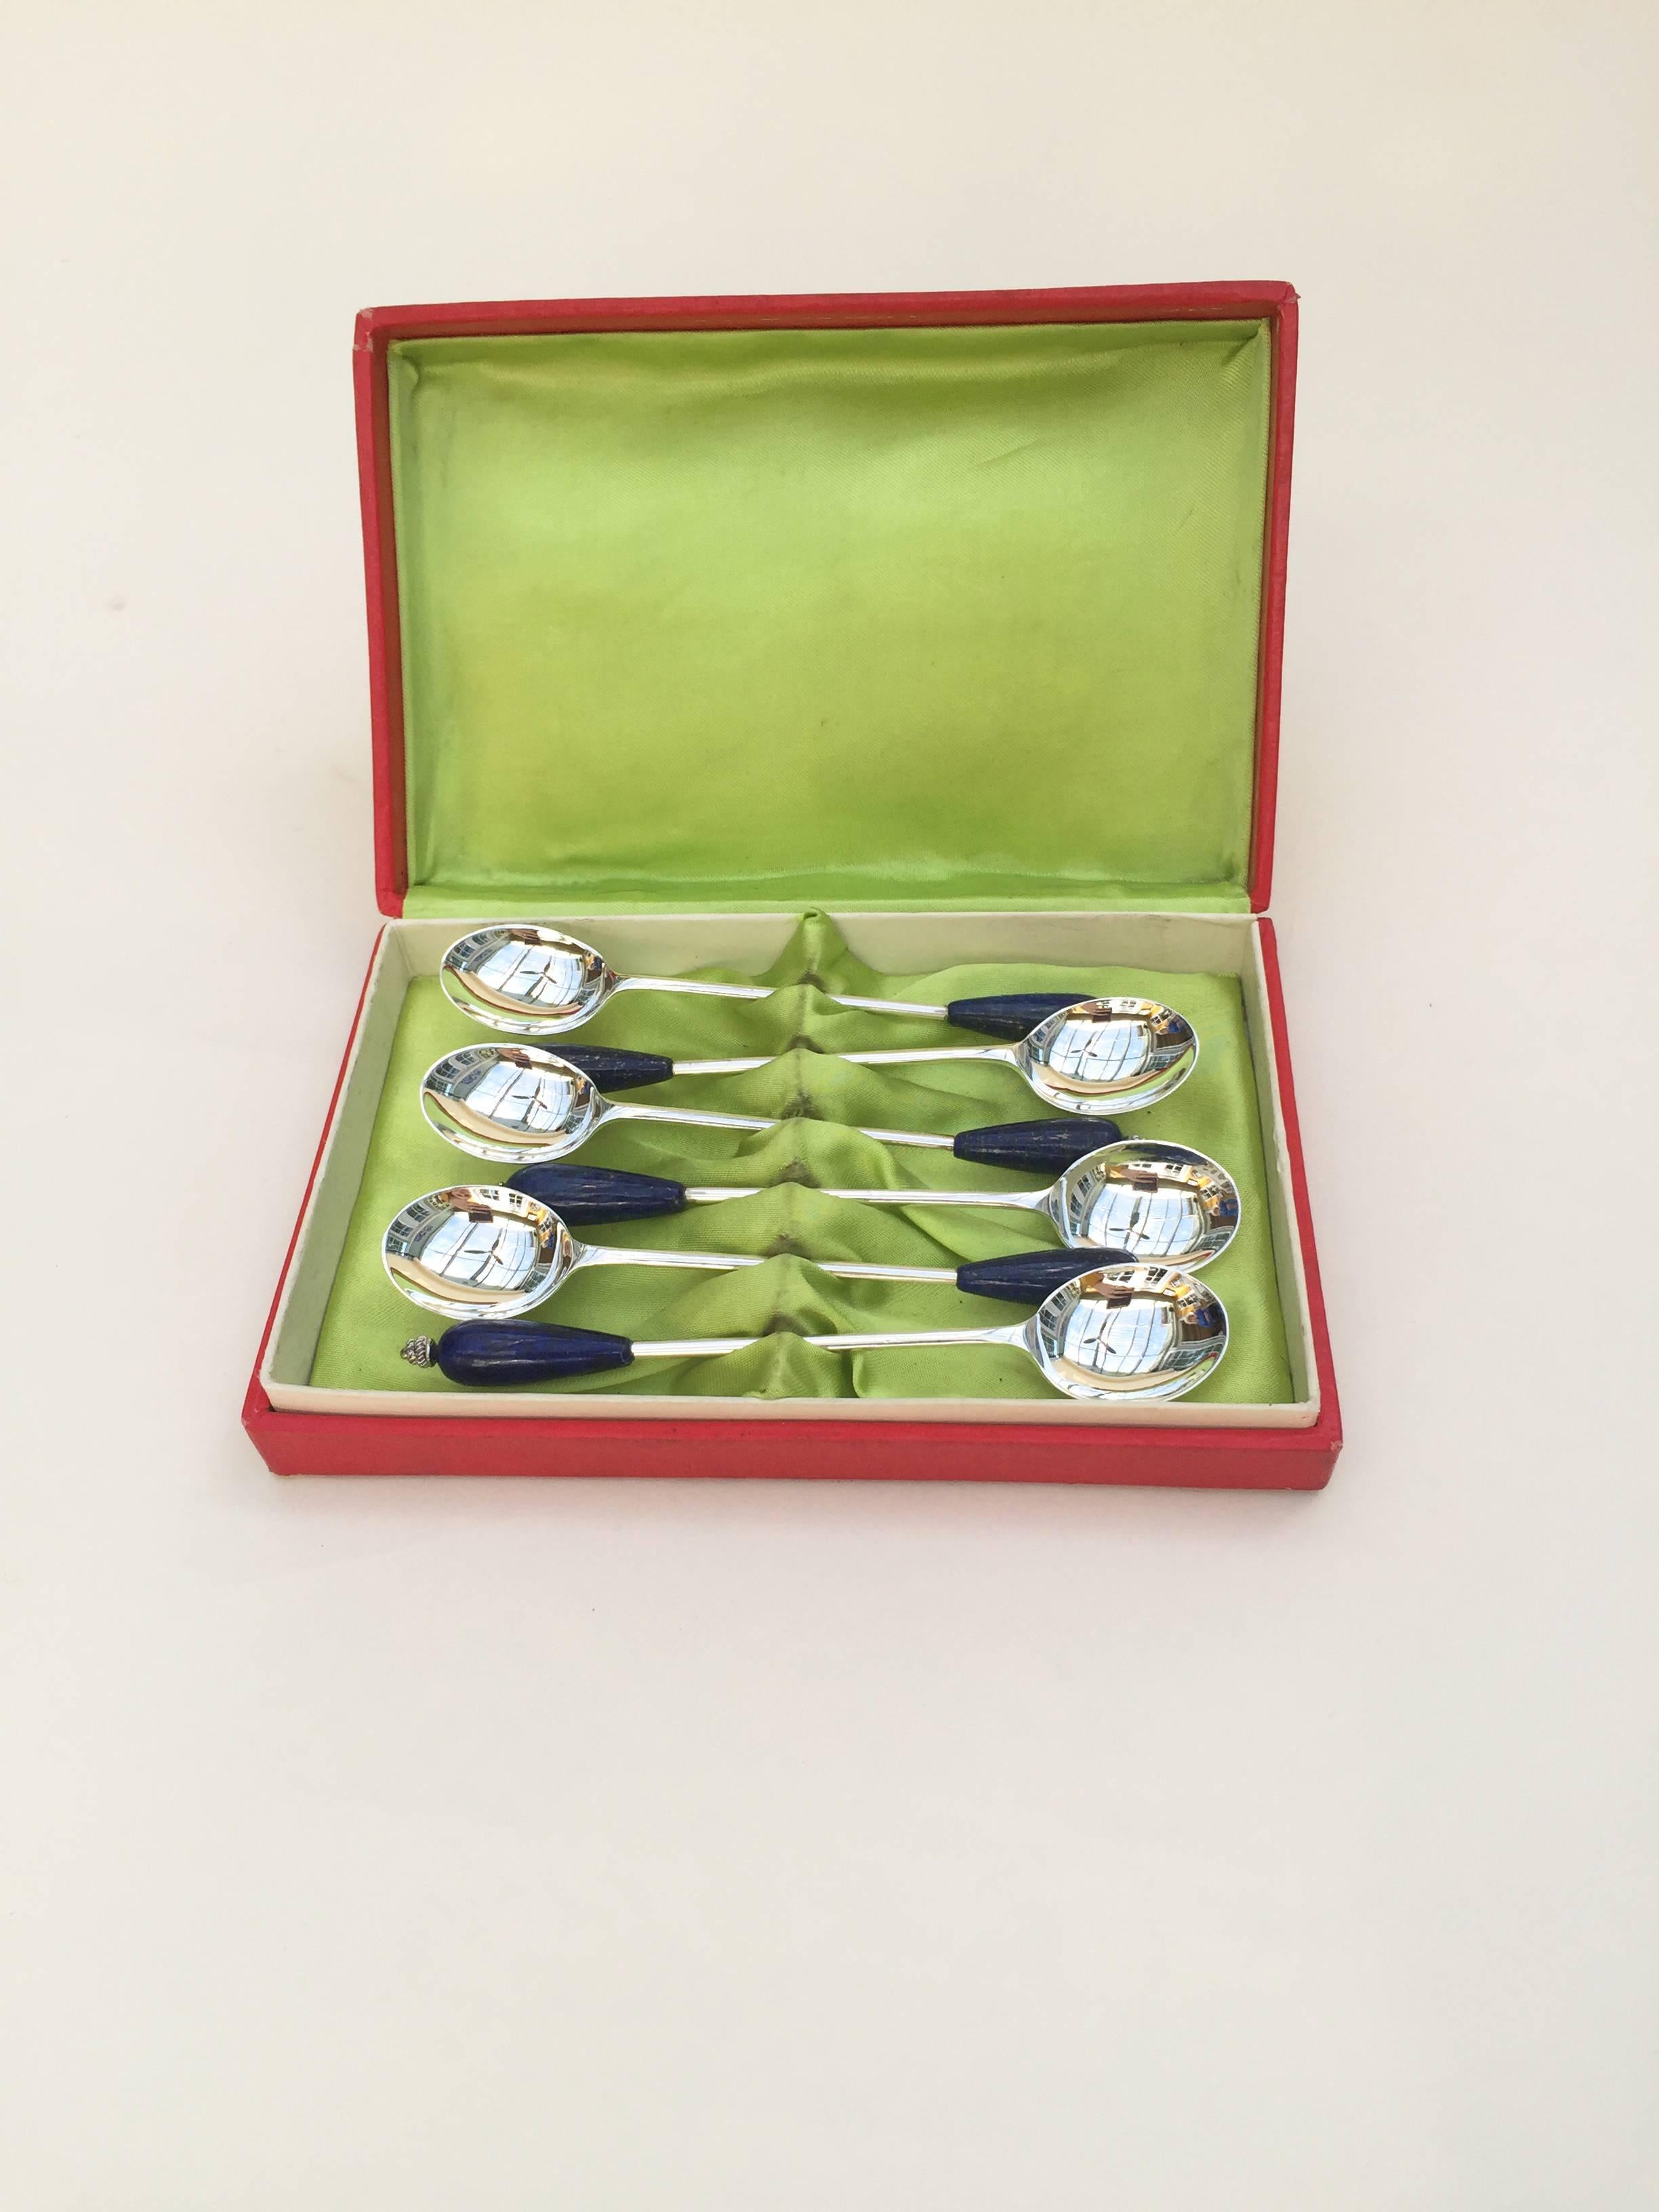 This set of 6 old English sterling silver plated tea spoons are elegantly made with lapis lazuli and sterling silver coil beaded ends. The deep royal blue of the lapis lazuli fits in with any blue porcelain tea set (Delft, Imperial Russian, and